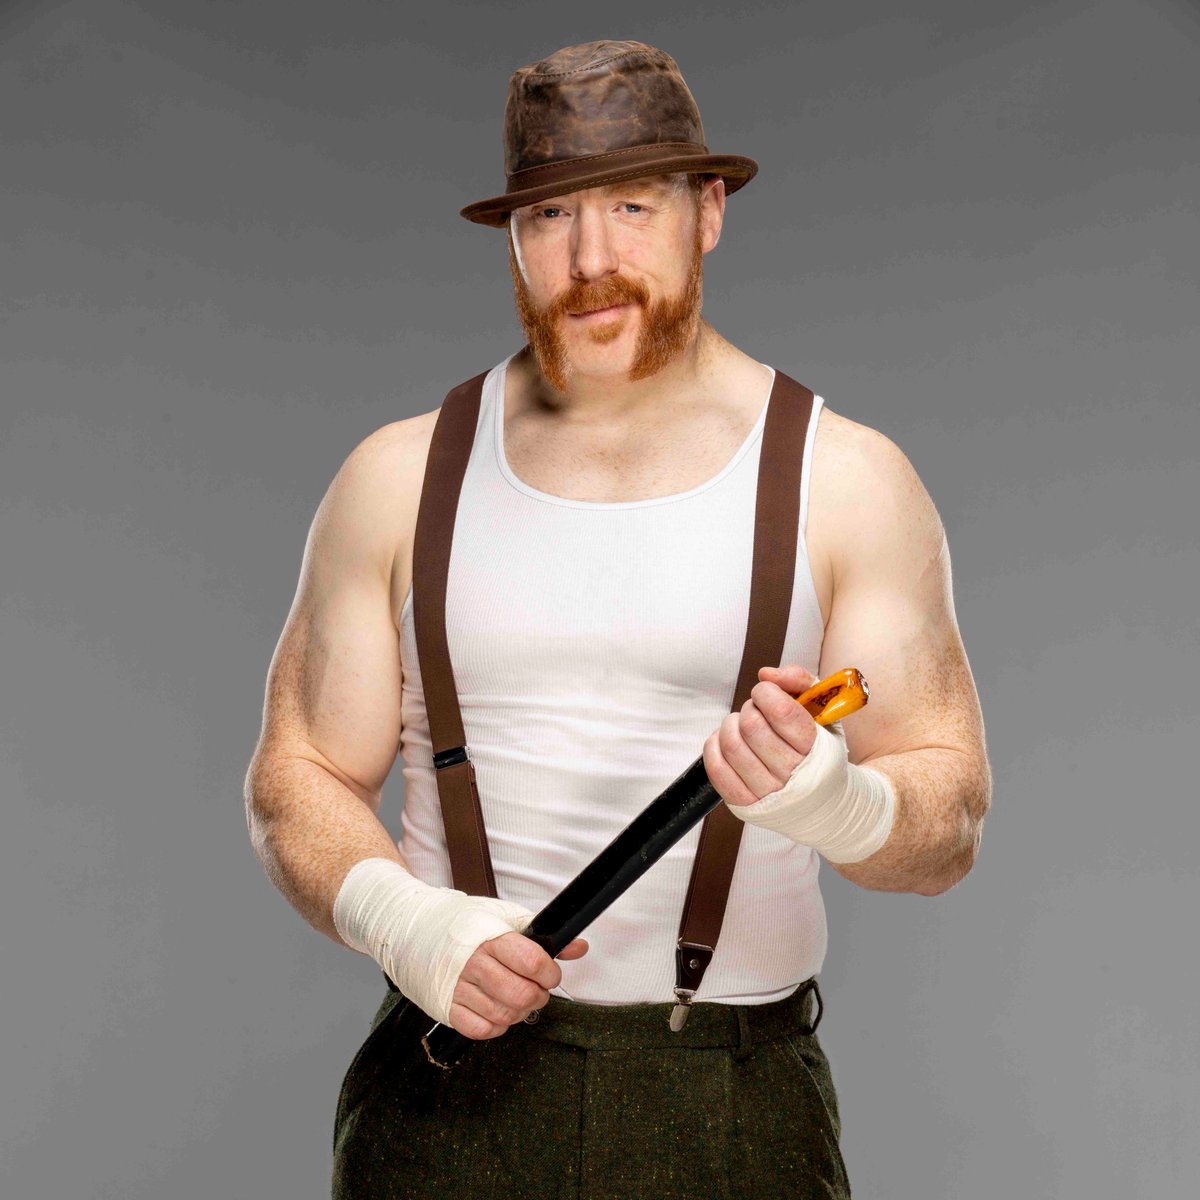 🏆 3-time WWE Champion
🌎 World Heavyweight Champion
👉 2012 #RoyalRumble match winner
🇺🇸 3-time #USChampion 
🤝 5-time Tag Team Champion
💰 2015 Mr. Money in the Bank
👑 2010 King of the Ring
👍 A top notch fella

Happy birthday to @WWESheamus!